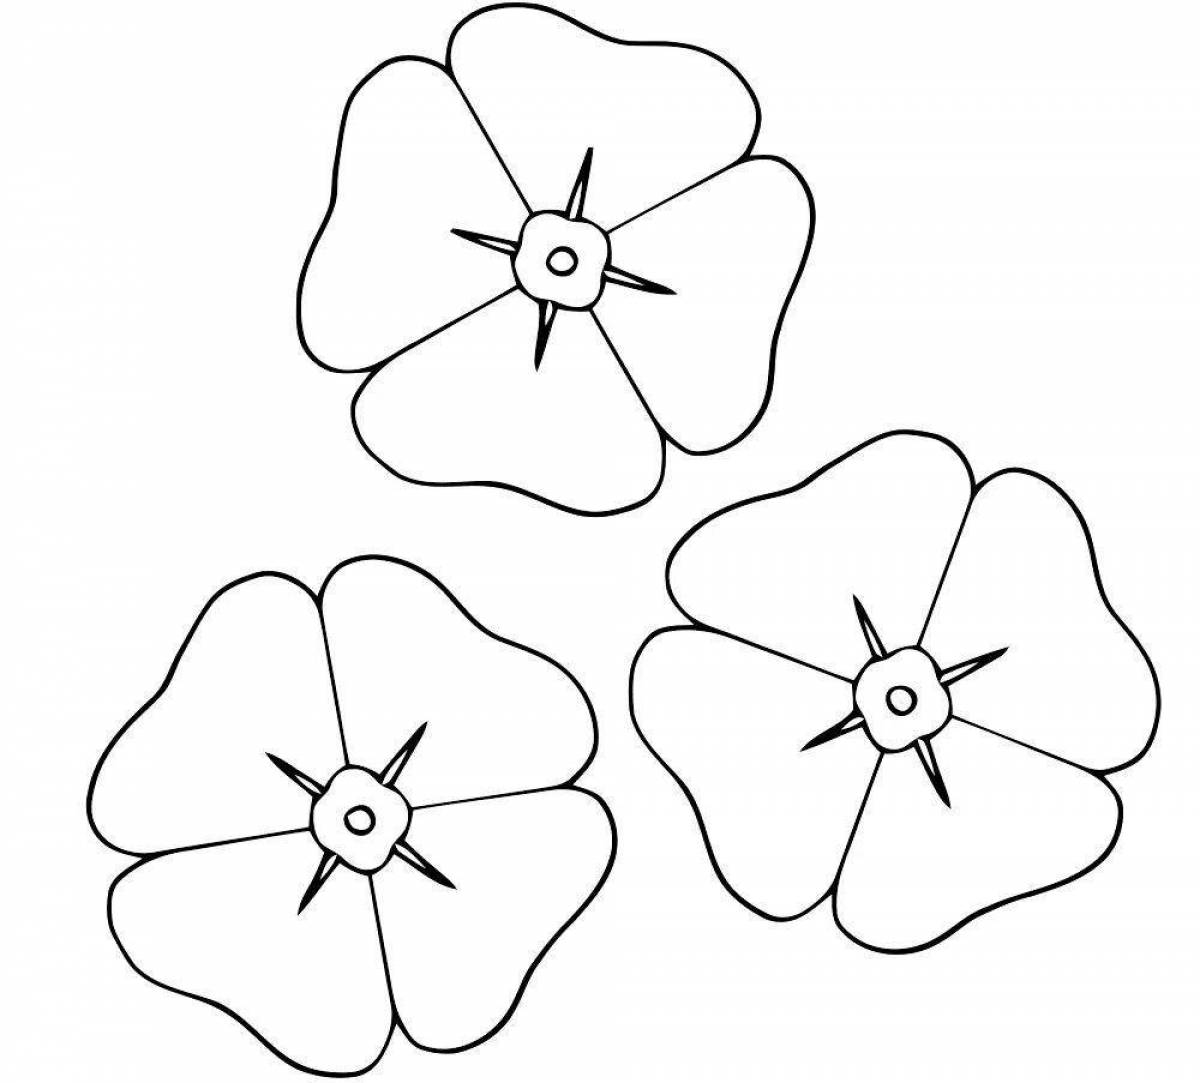 Coloring page with beautiful flower pattern